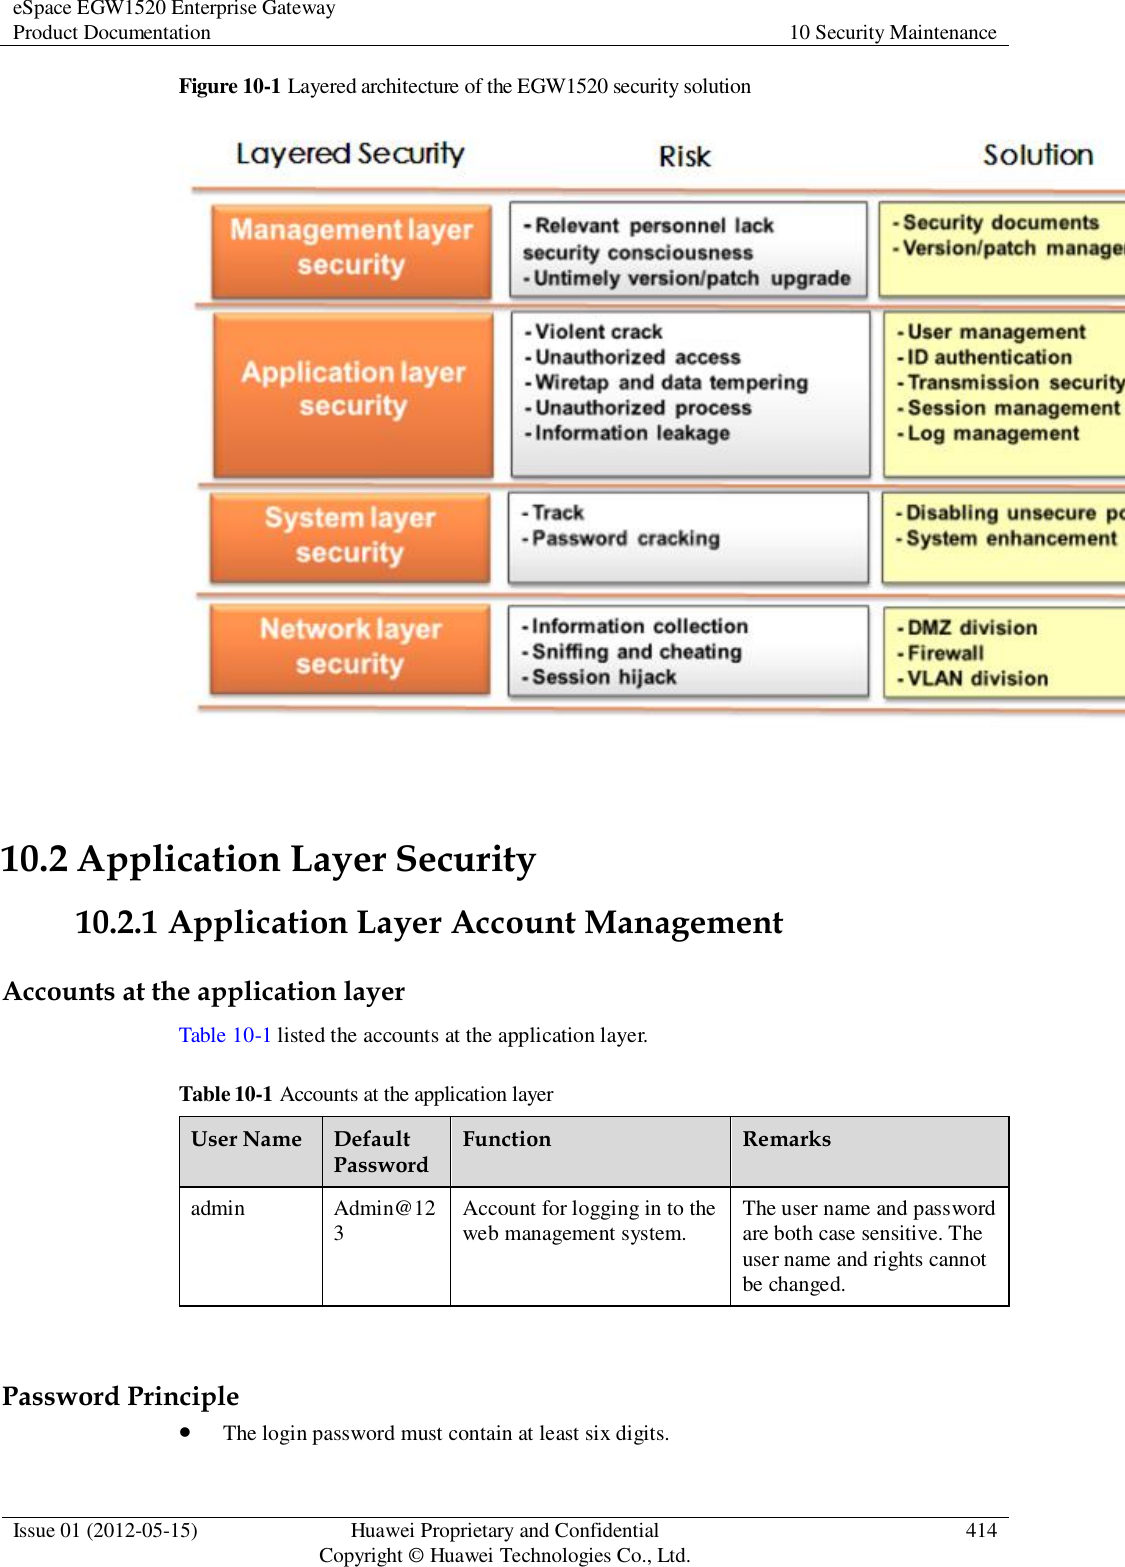 eSpace EGW1520 Enterprise Gateway Product Documentation 10 Security Maintenance  Issue 01 (2012-05-15) Huawei Proprietary and Confidential                                     Copyright © Huawei Technologies Co., Ltd. 414  Figure 10-1 Layered architecture of the EGW1520 security solution   10.2 Application Layer Security 10.2.1 Application Layer Account Management Accounts at the application layer Table 10-1 listed the accounts at the application layer. Table 10-1 Accounts at the application layer User Name Default Password Function Remarks admin Admin@123 Account for logging in to the web management system. The user name and password are both case sensitive. The user name and rights cannot be changed.  Password Principle  The login password must contain at least six digits. 